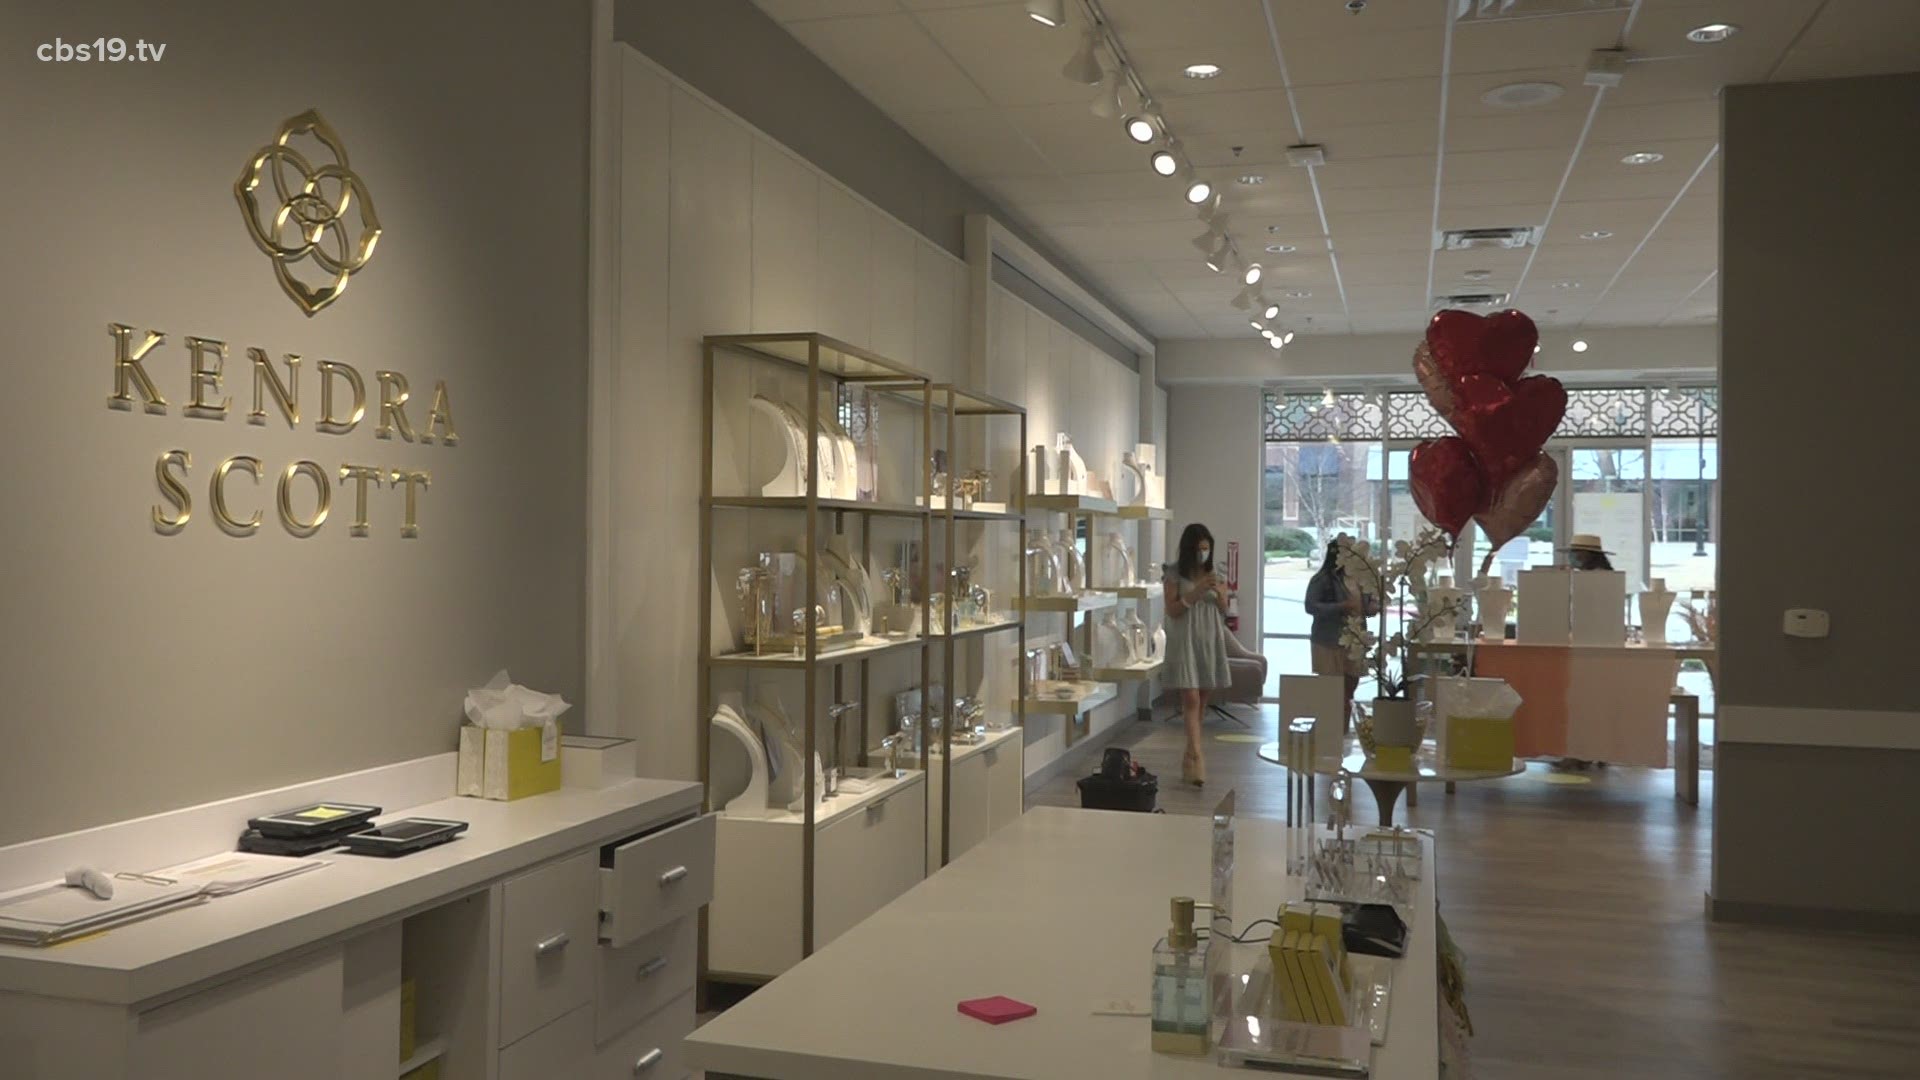 Kendra Scott in Tyler partners with Patrick Mahomes' foundation to give back to community